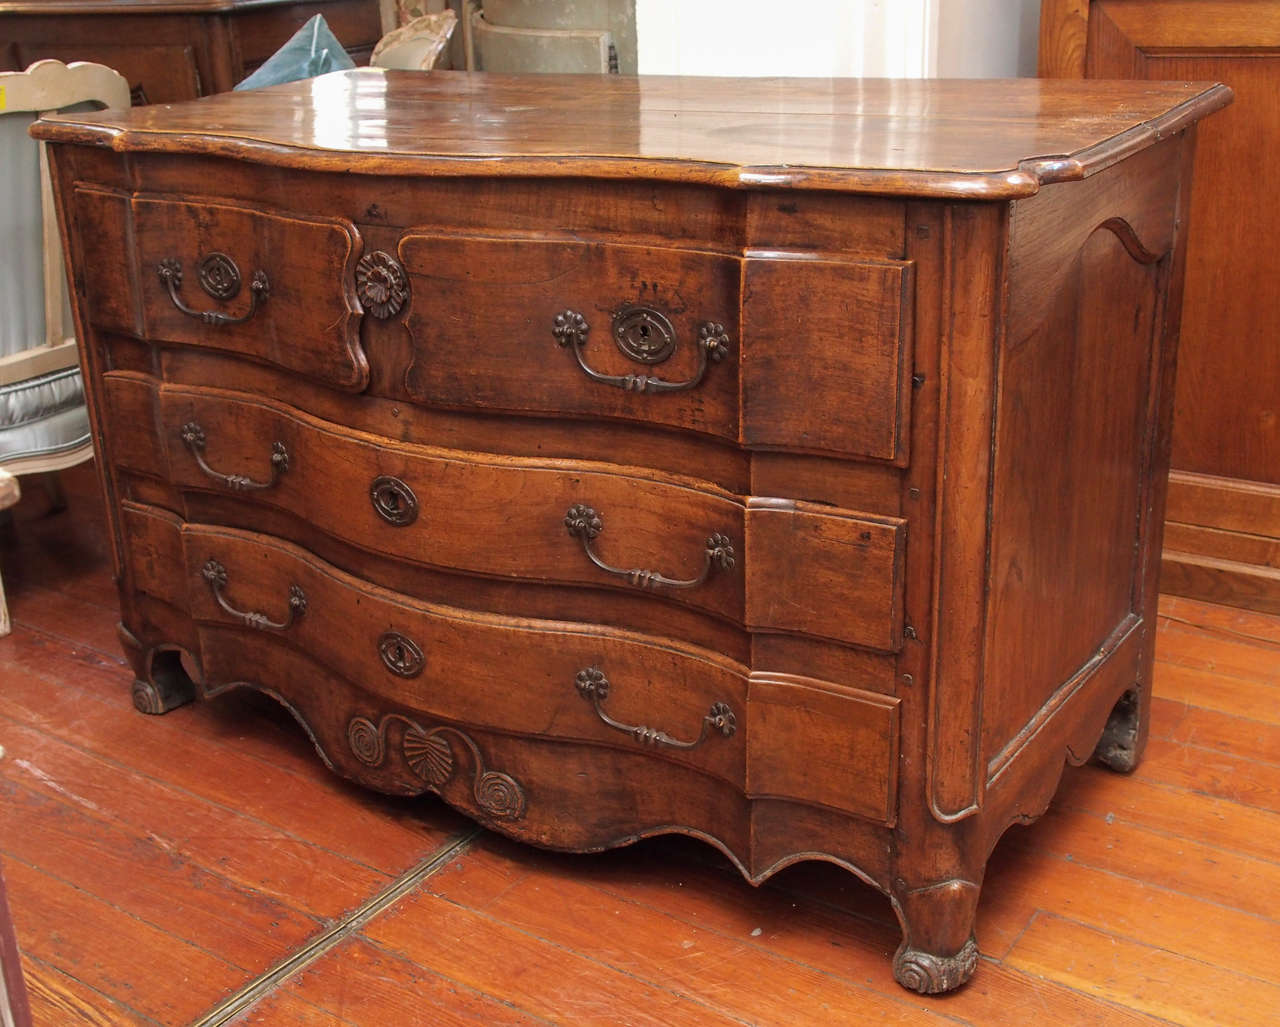 18th century Louis XV  serpentine  walnut commode with 4 drawers on 3 levels.
Period piece, provincial work. Scrolled feet, carved shell motif on the bottom.